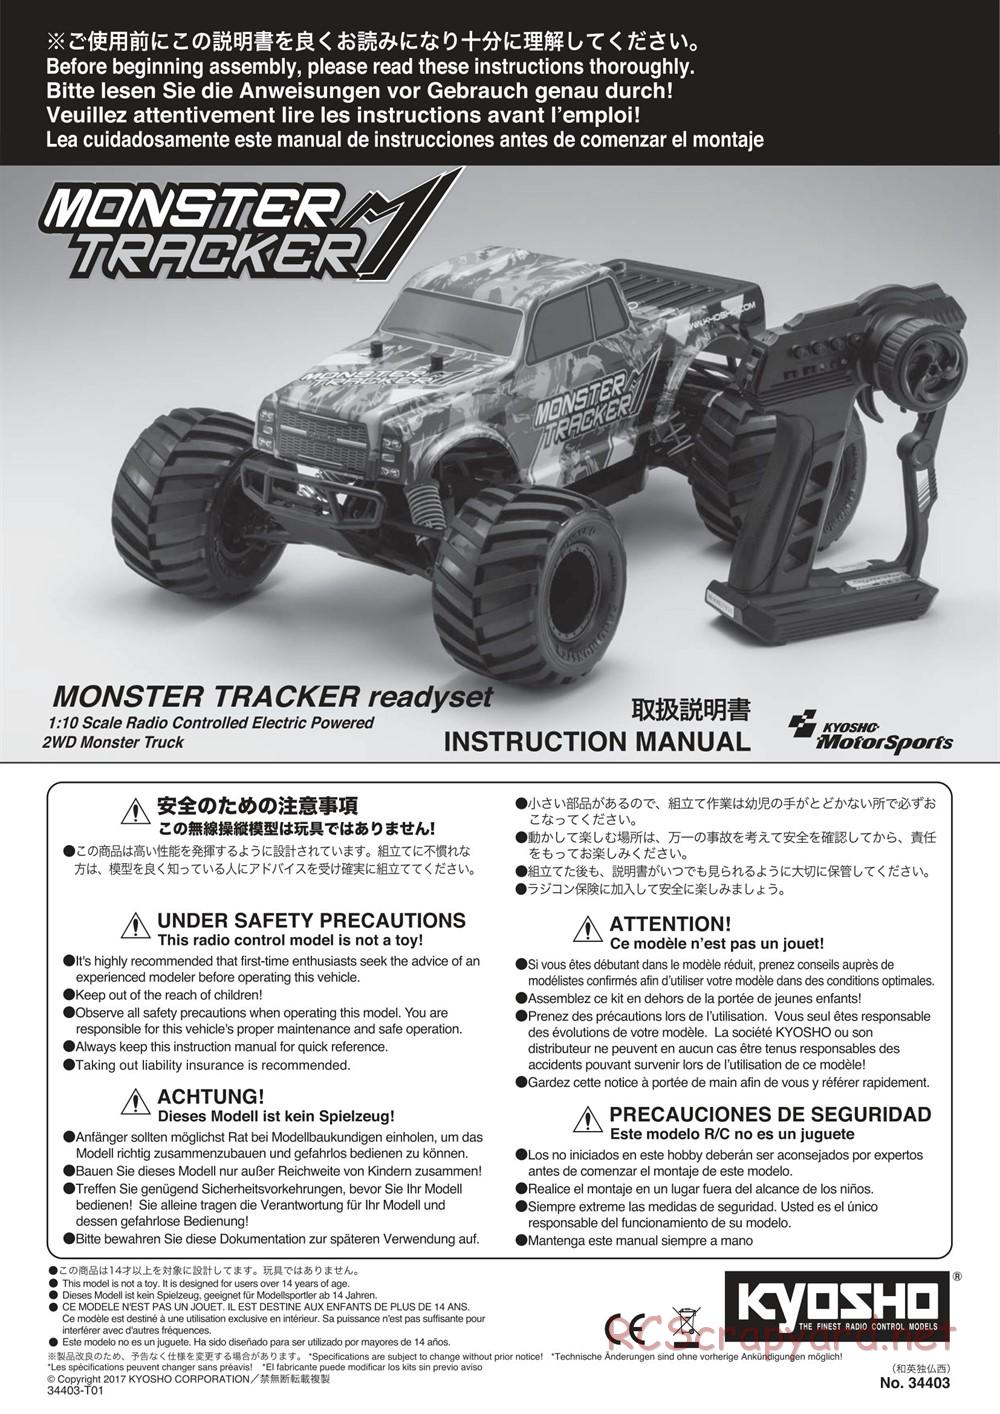 Kyosho - Monster Tracker EP - Manual - Page 1